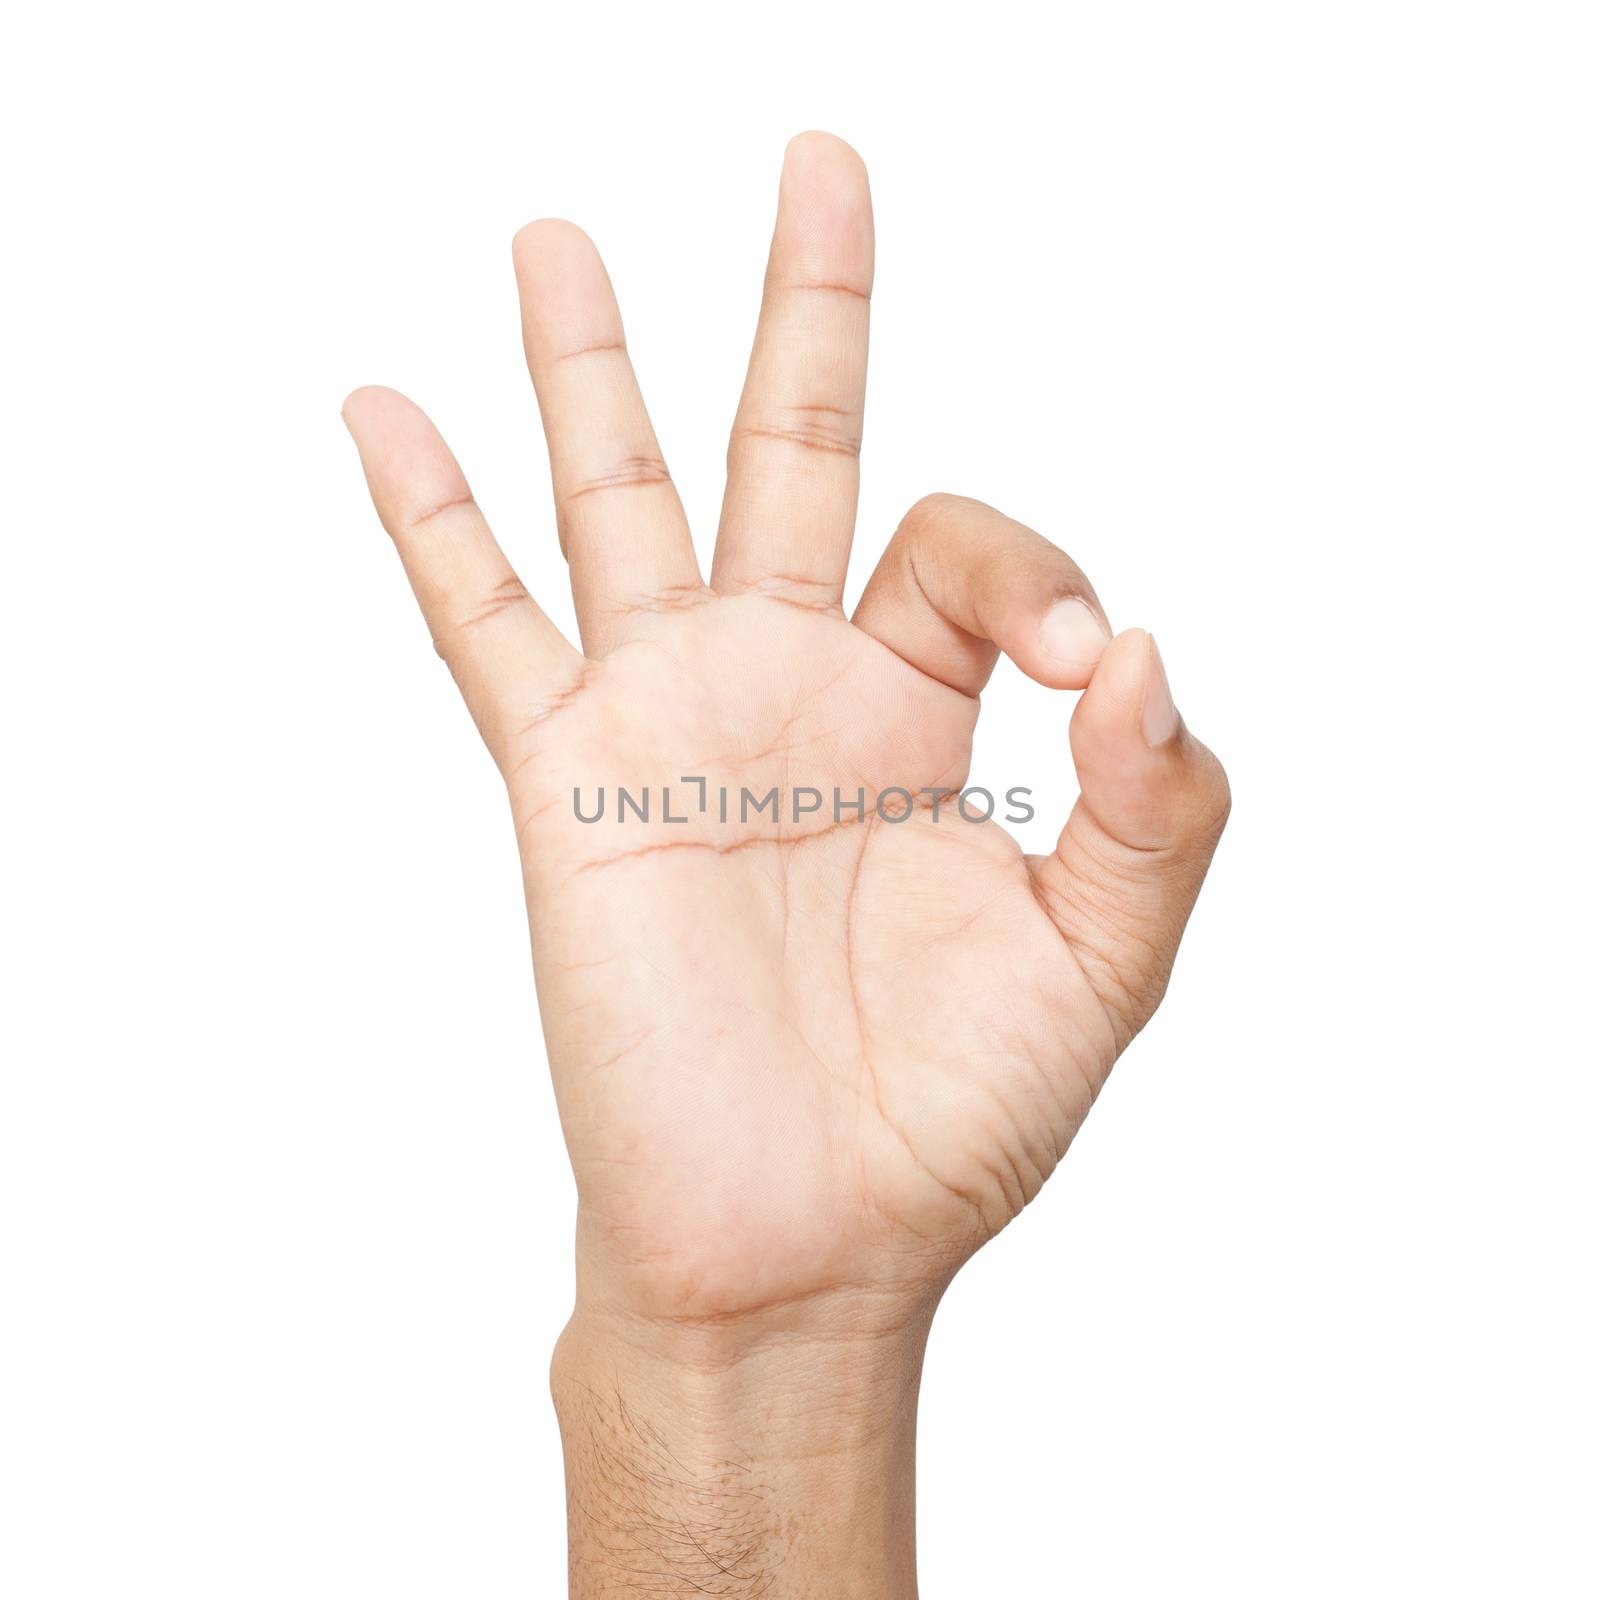 Hand OK sign on white background by foto76